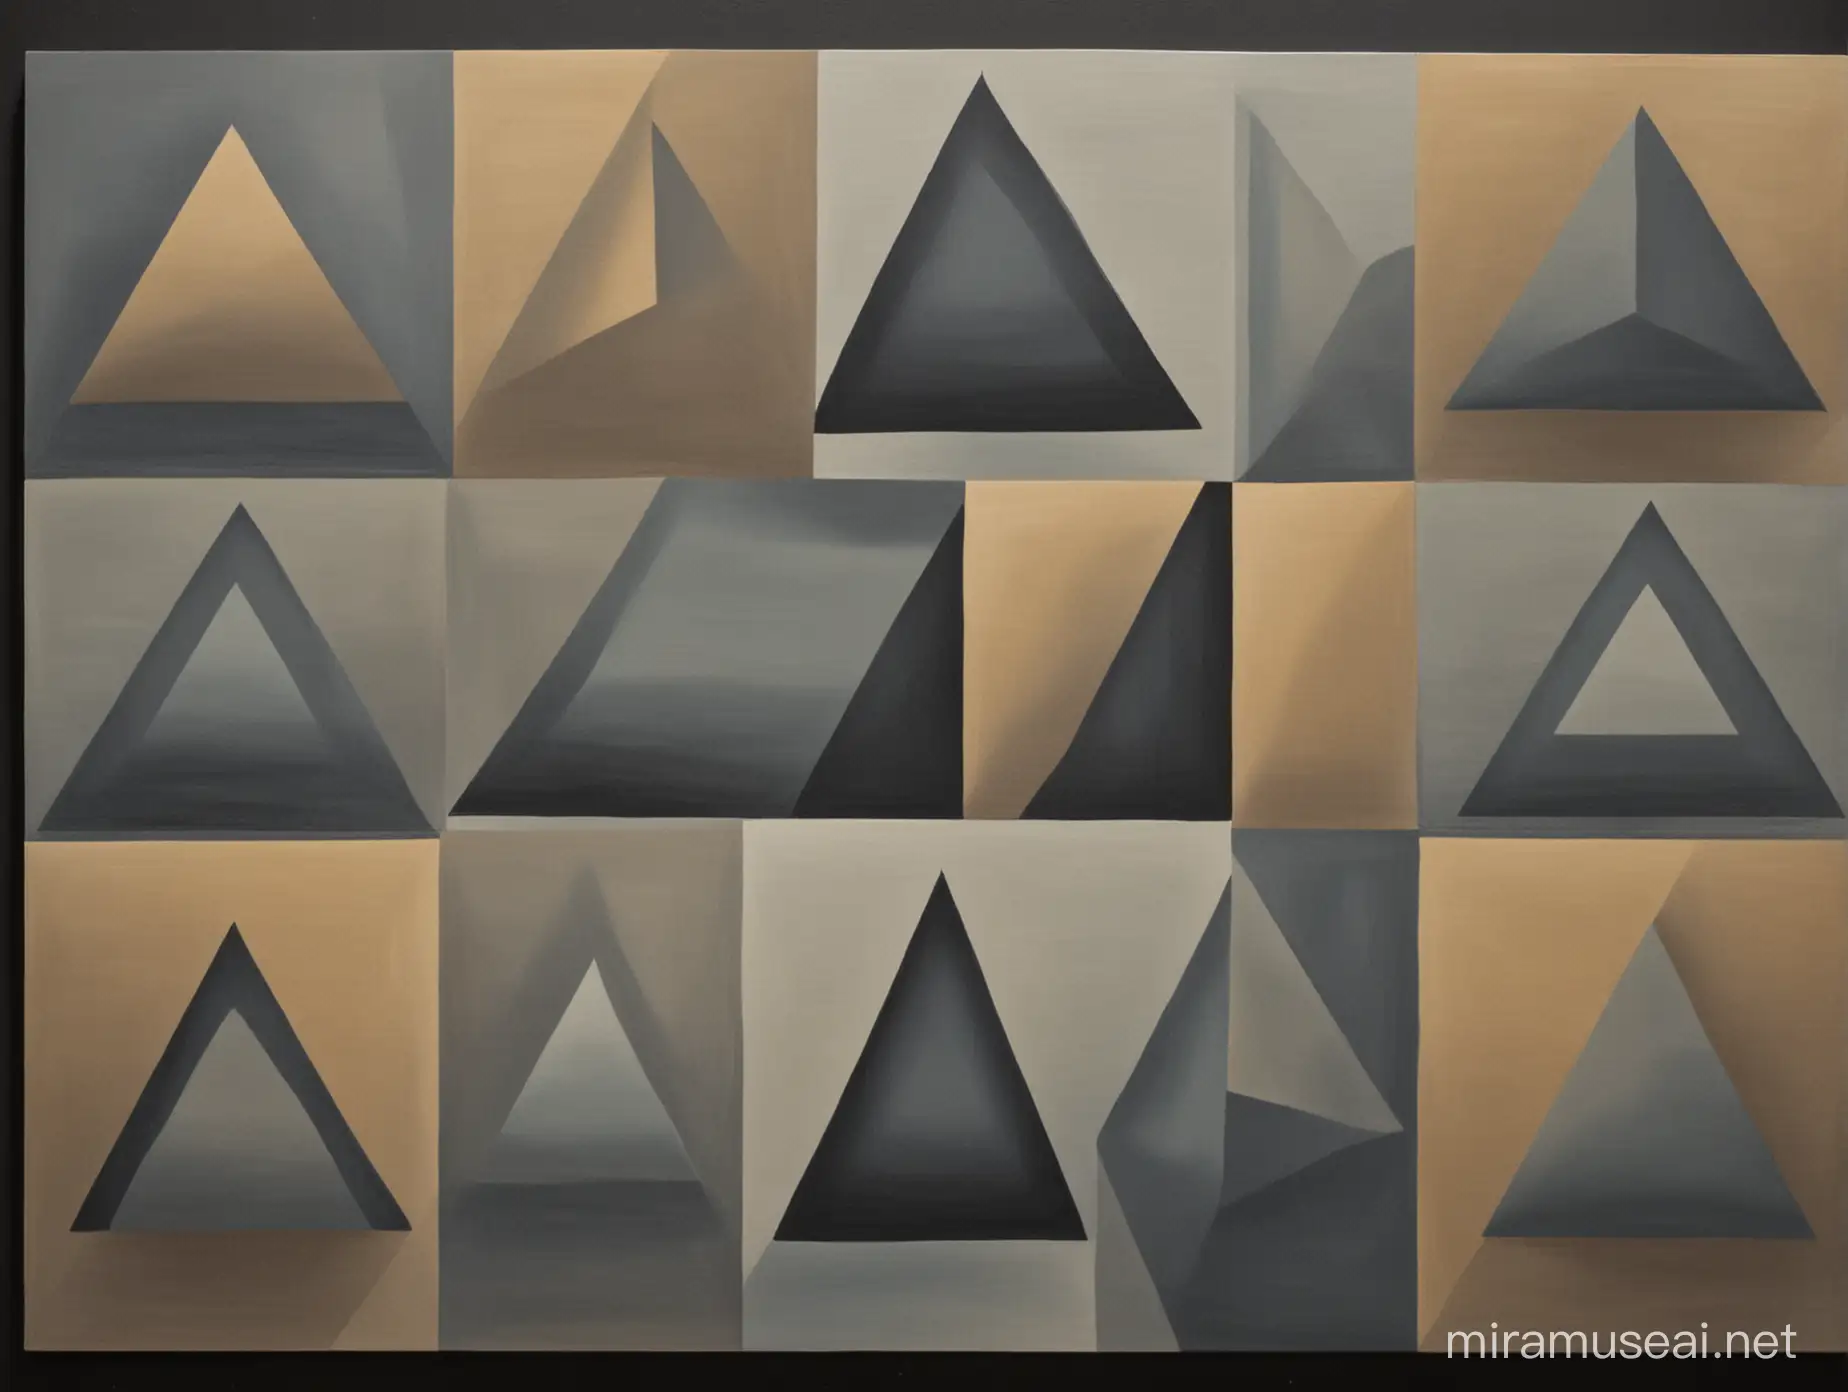 Geometric Abstract Art Vasarelyinspired Triangles and Rectangles